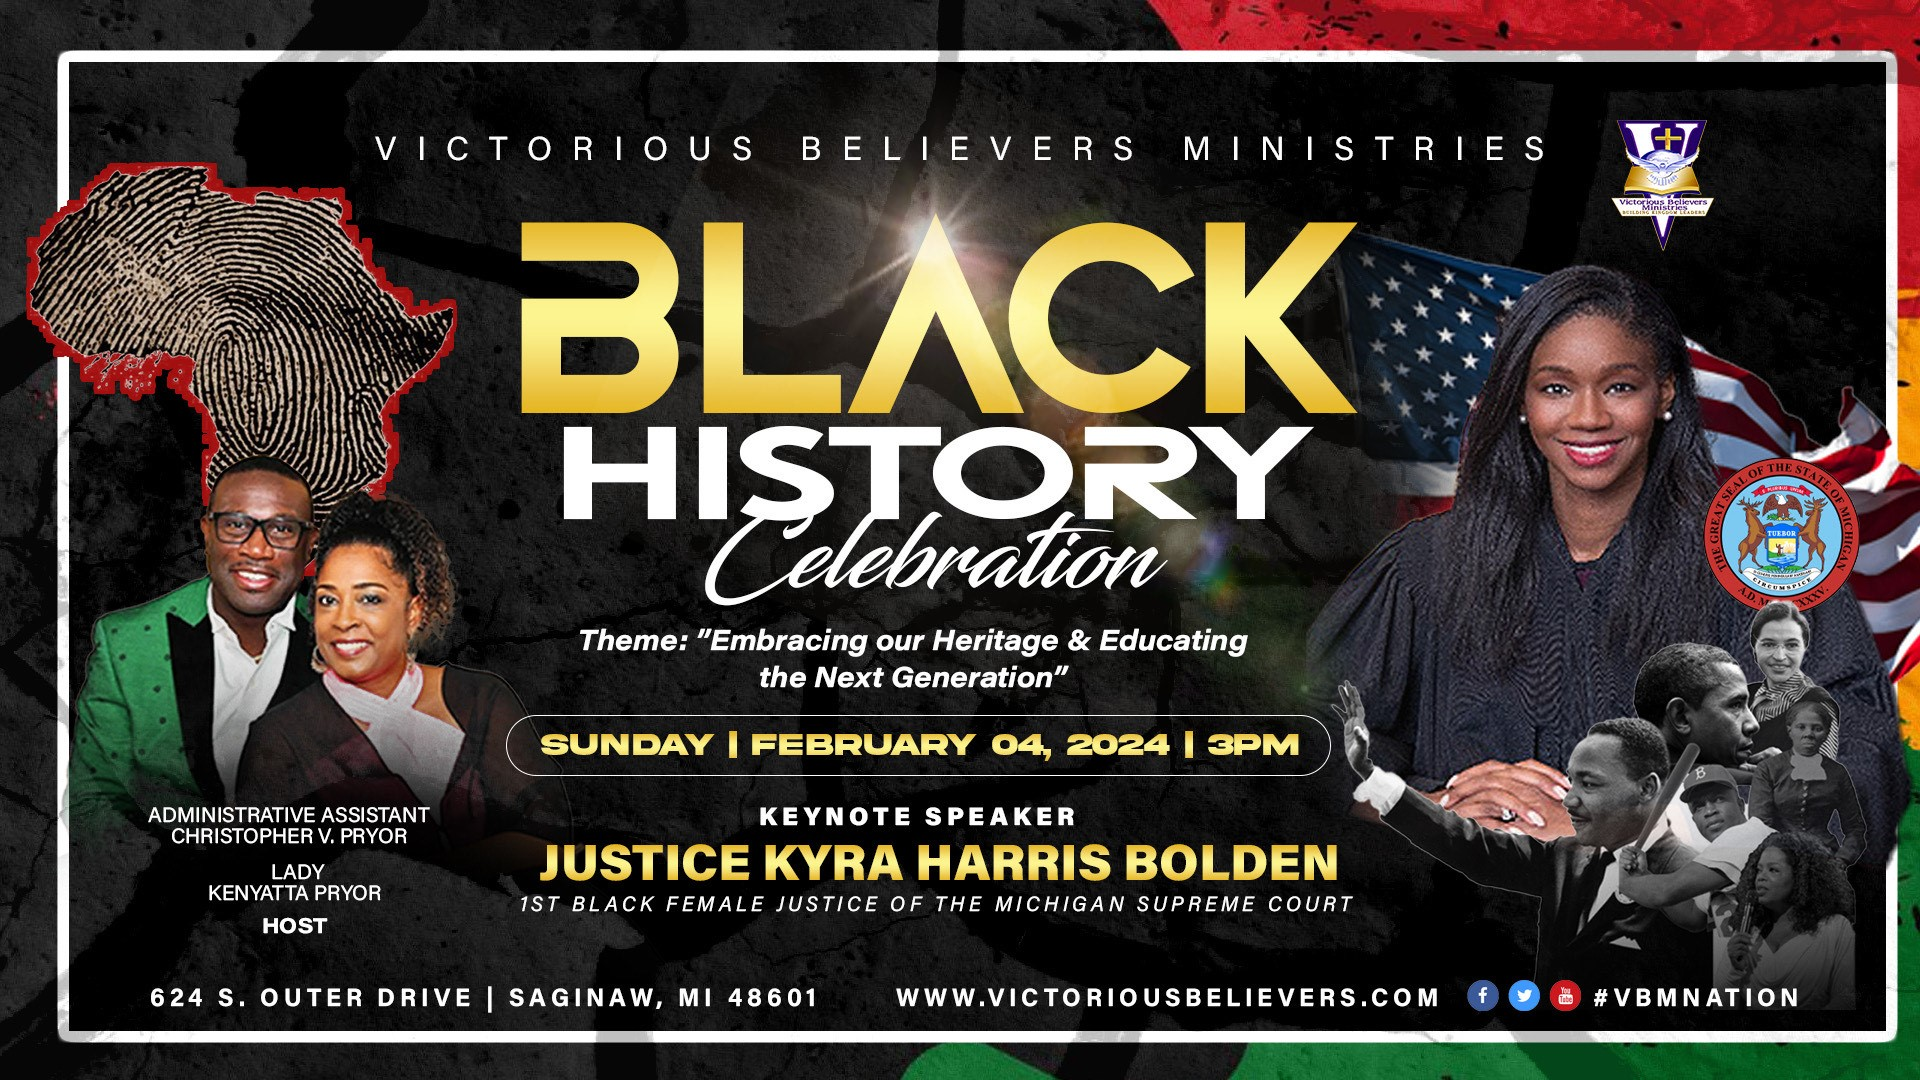 <h1 class="tribe-events-single-event-title">Victorious Believers Ministries Black History Celebration</h1>